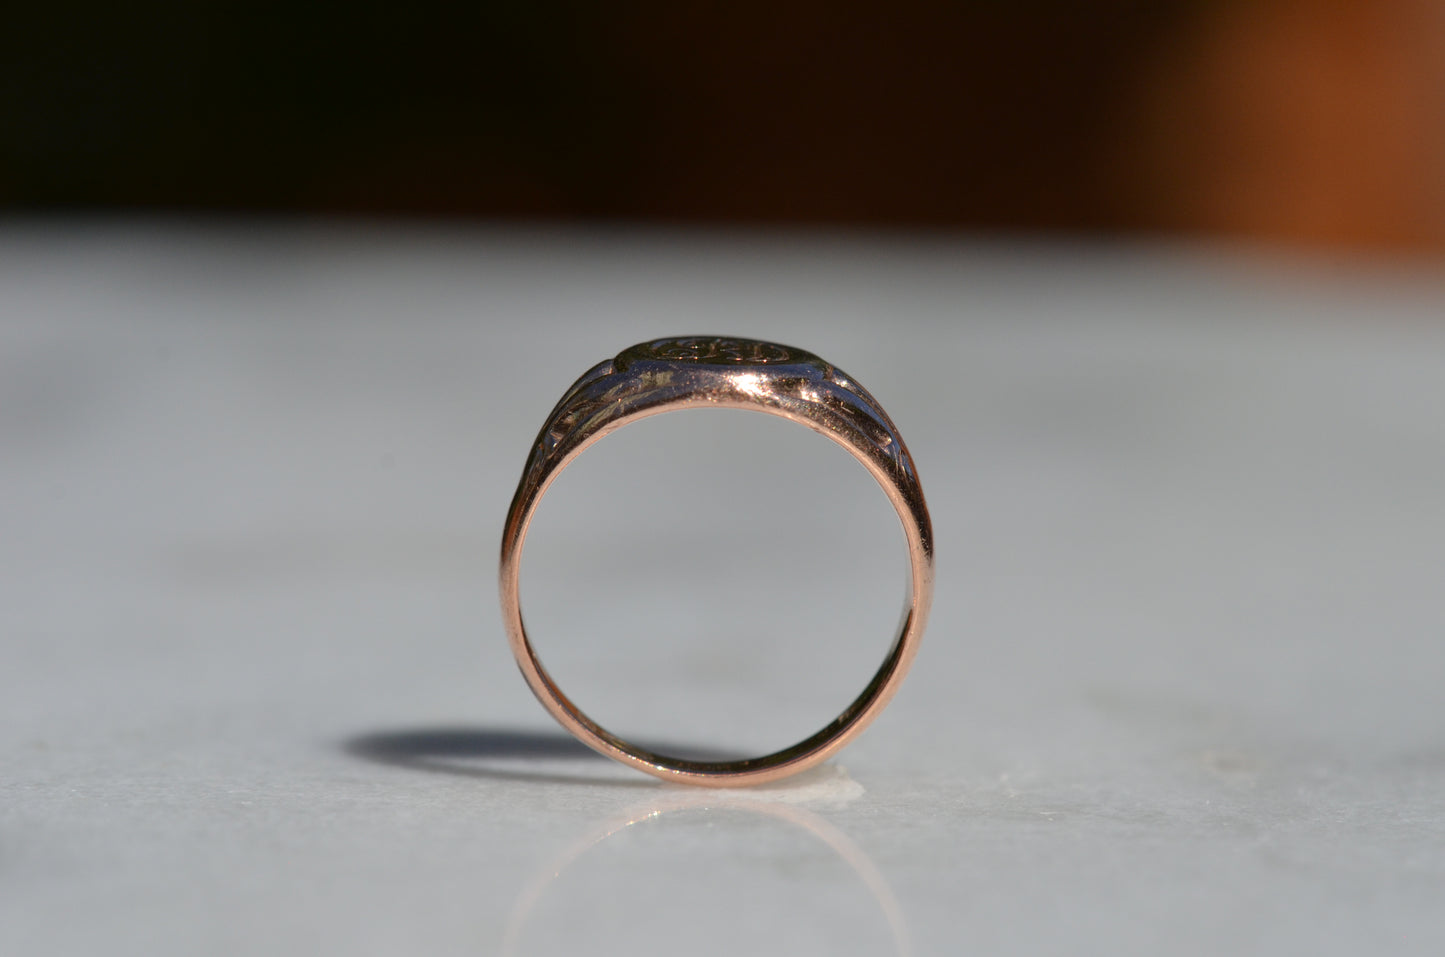 The ring is positioned upright and viewed through the finger hole.